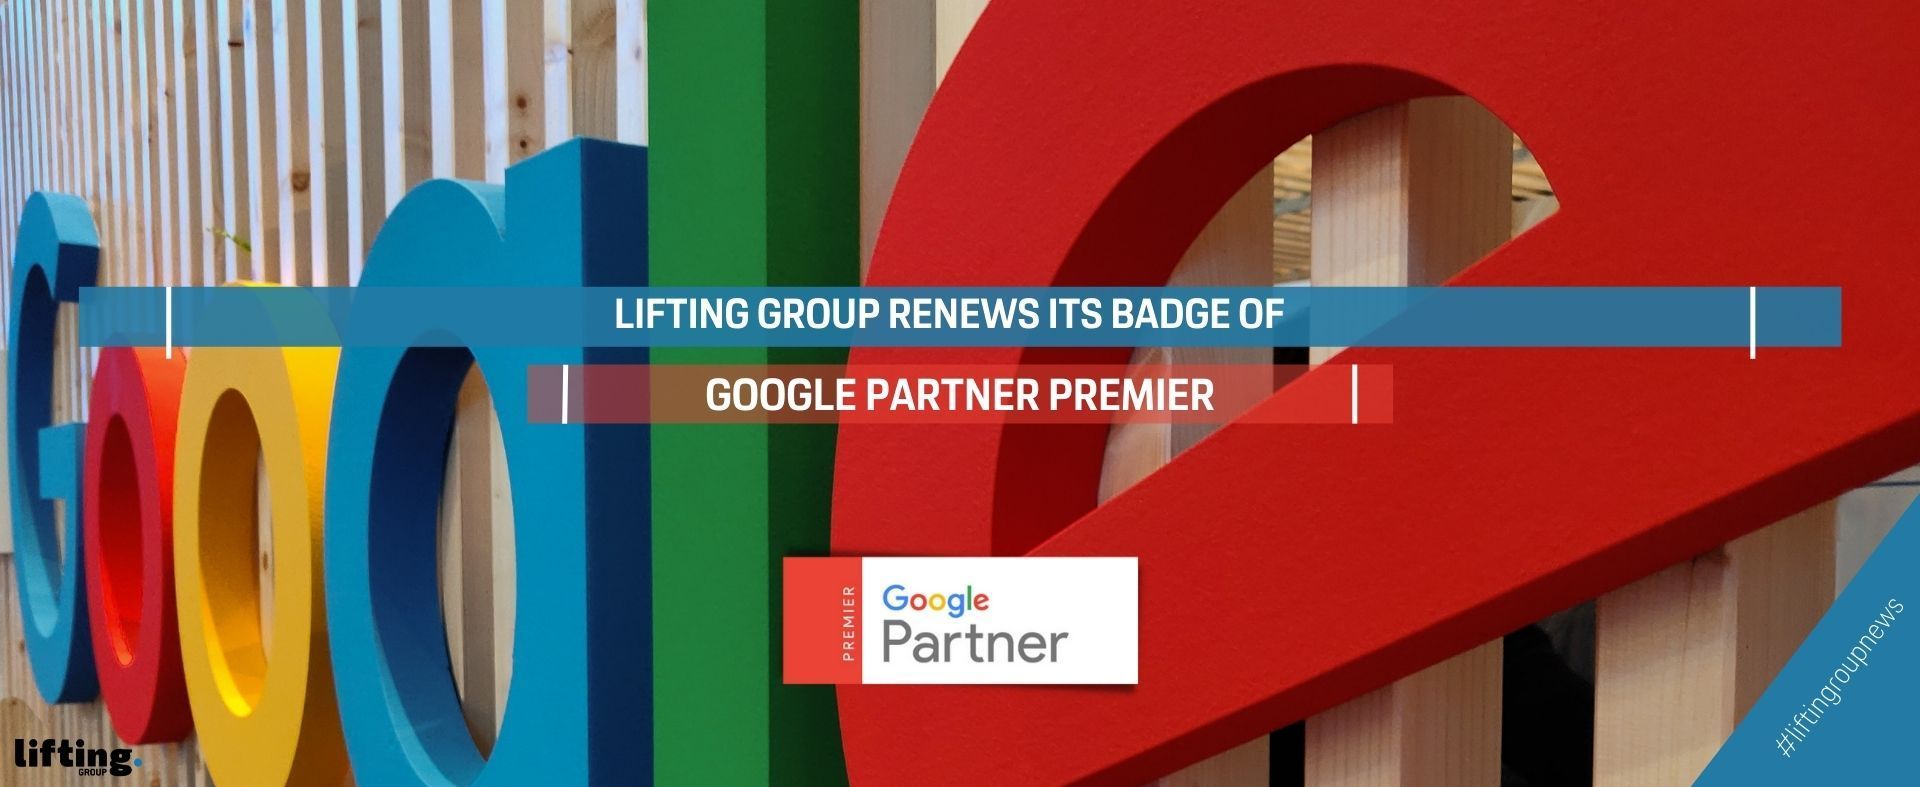 Lifting Group renews its Google Partner Premier badge for another year